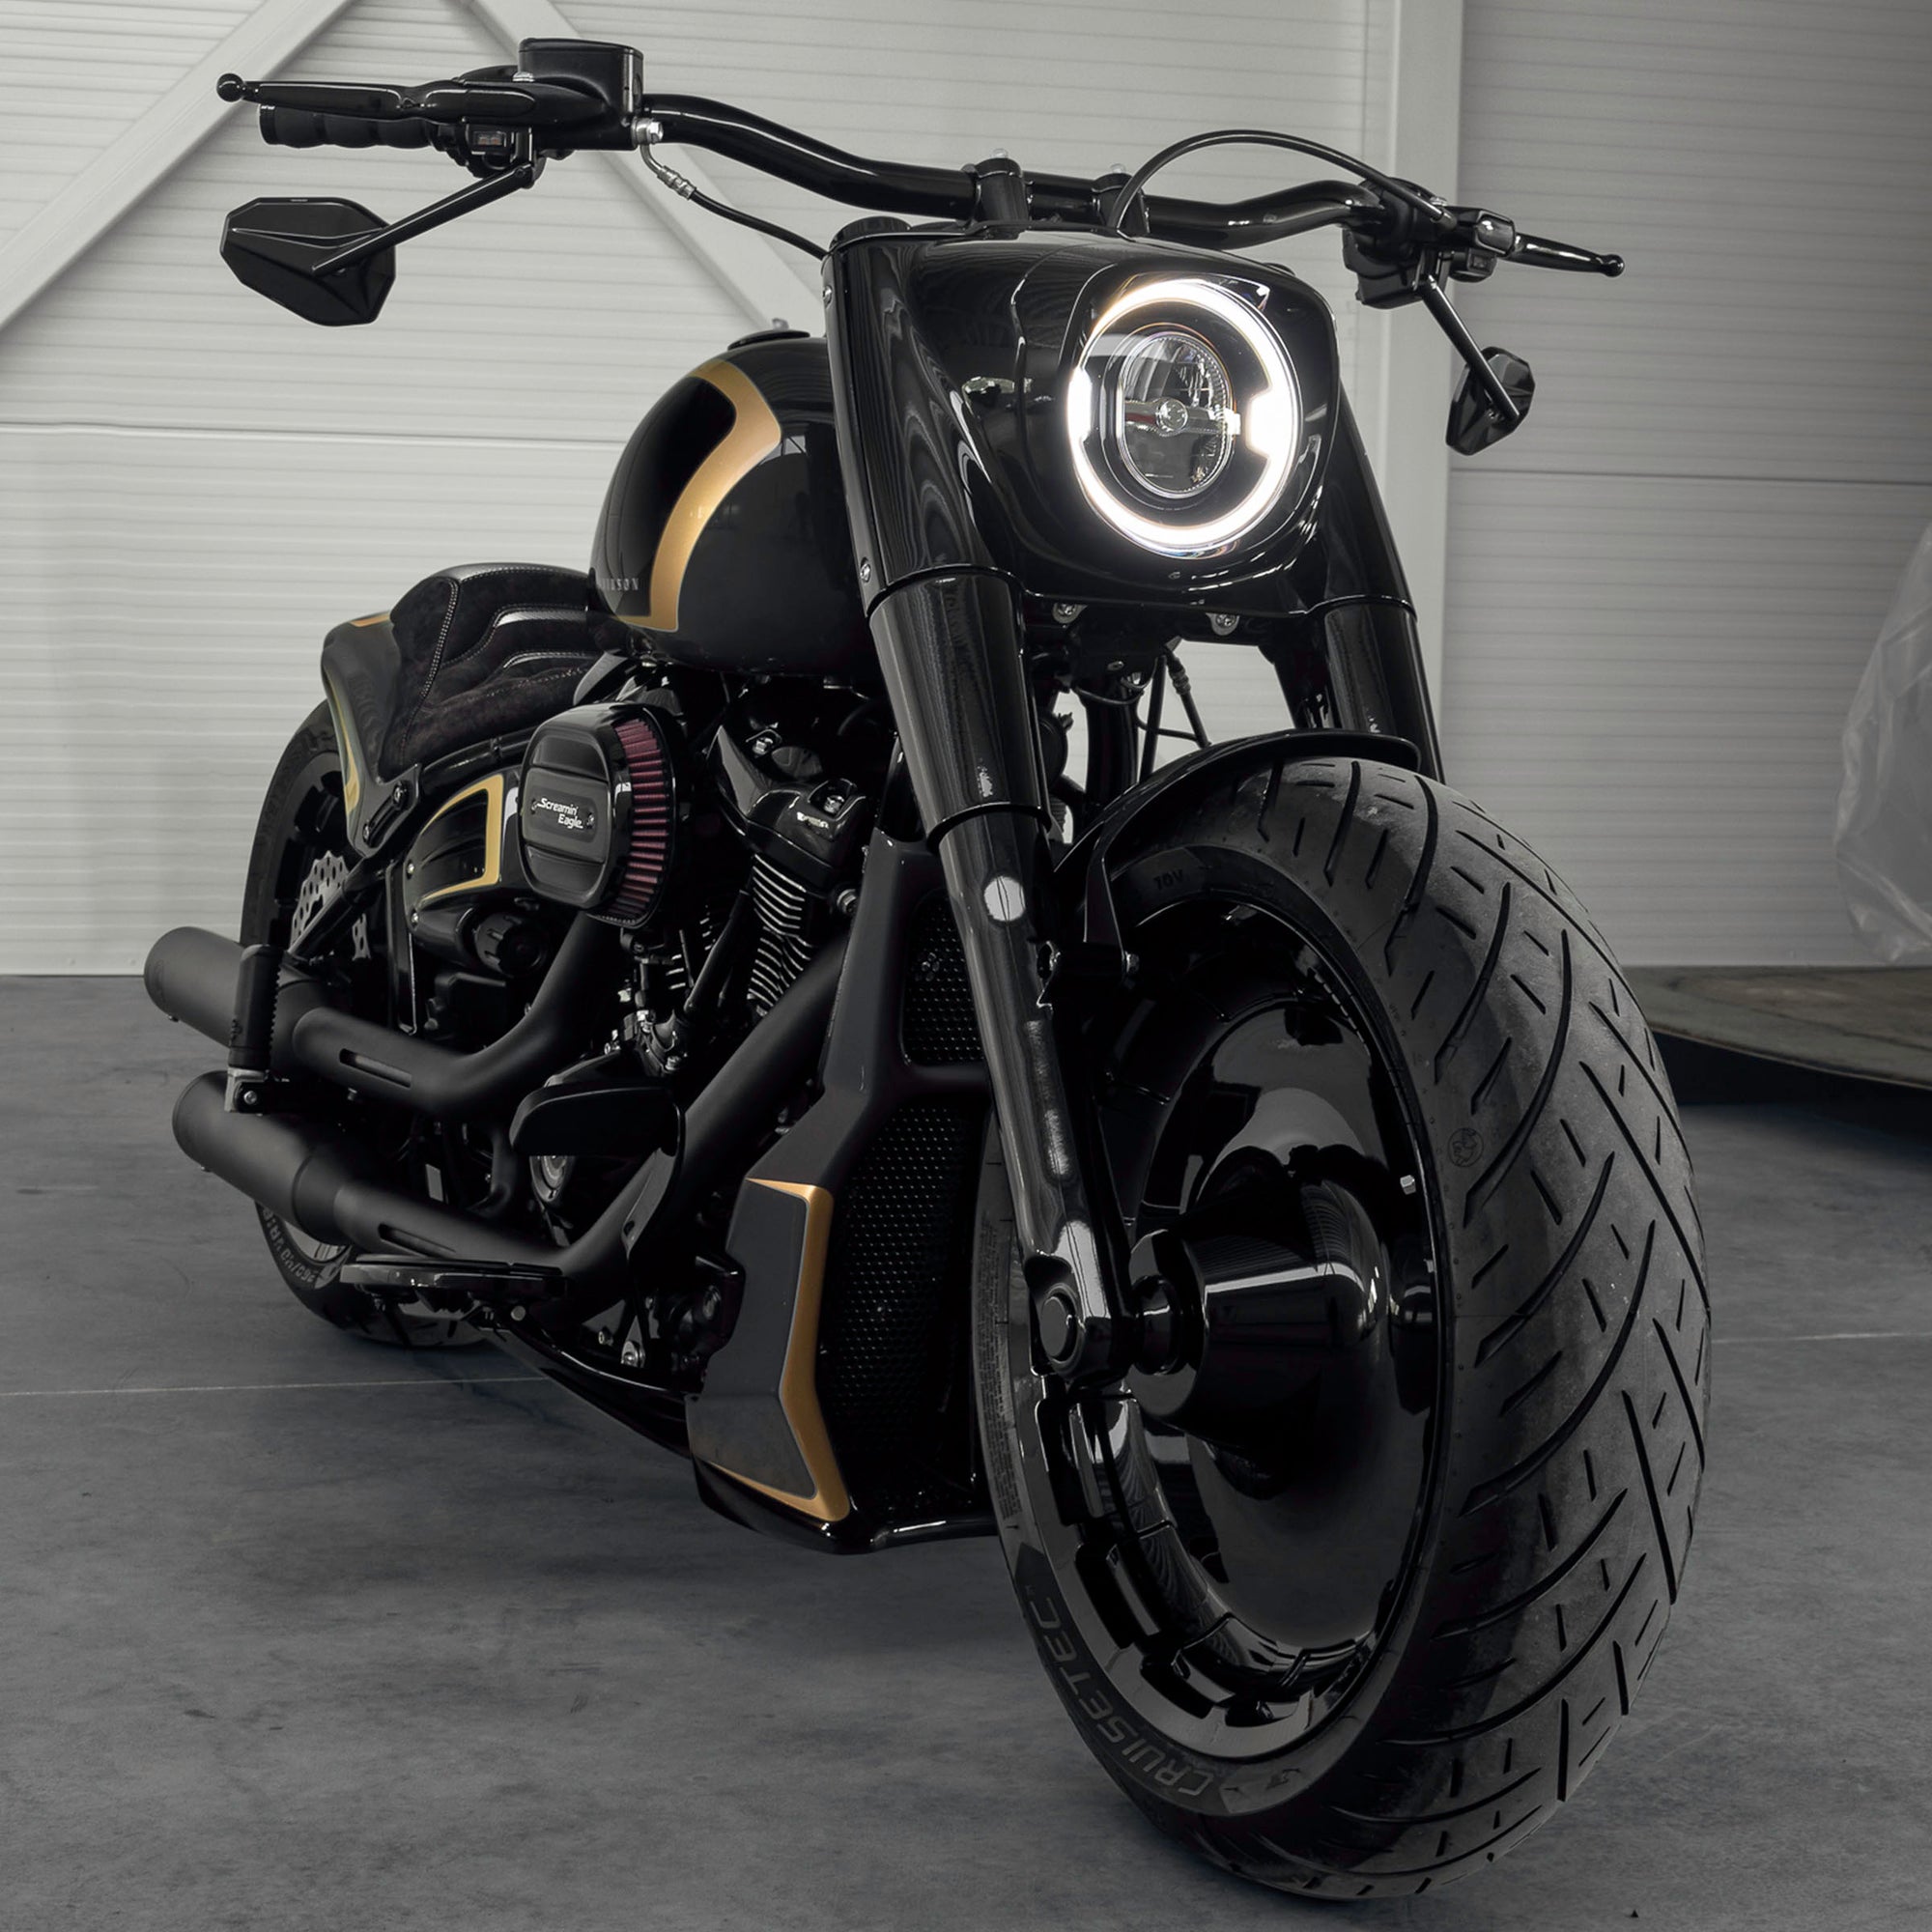 Harley Davidson motorcycle with Killer Custom parts from the front in a modern garage